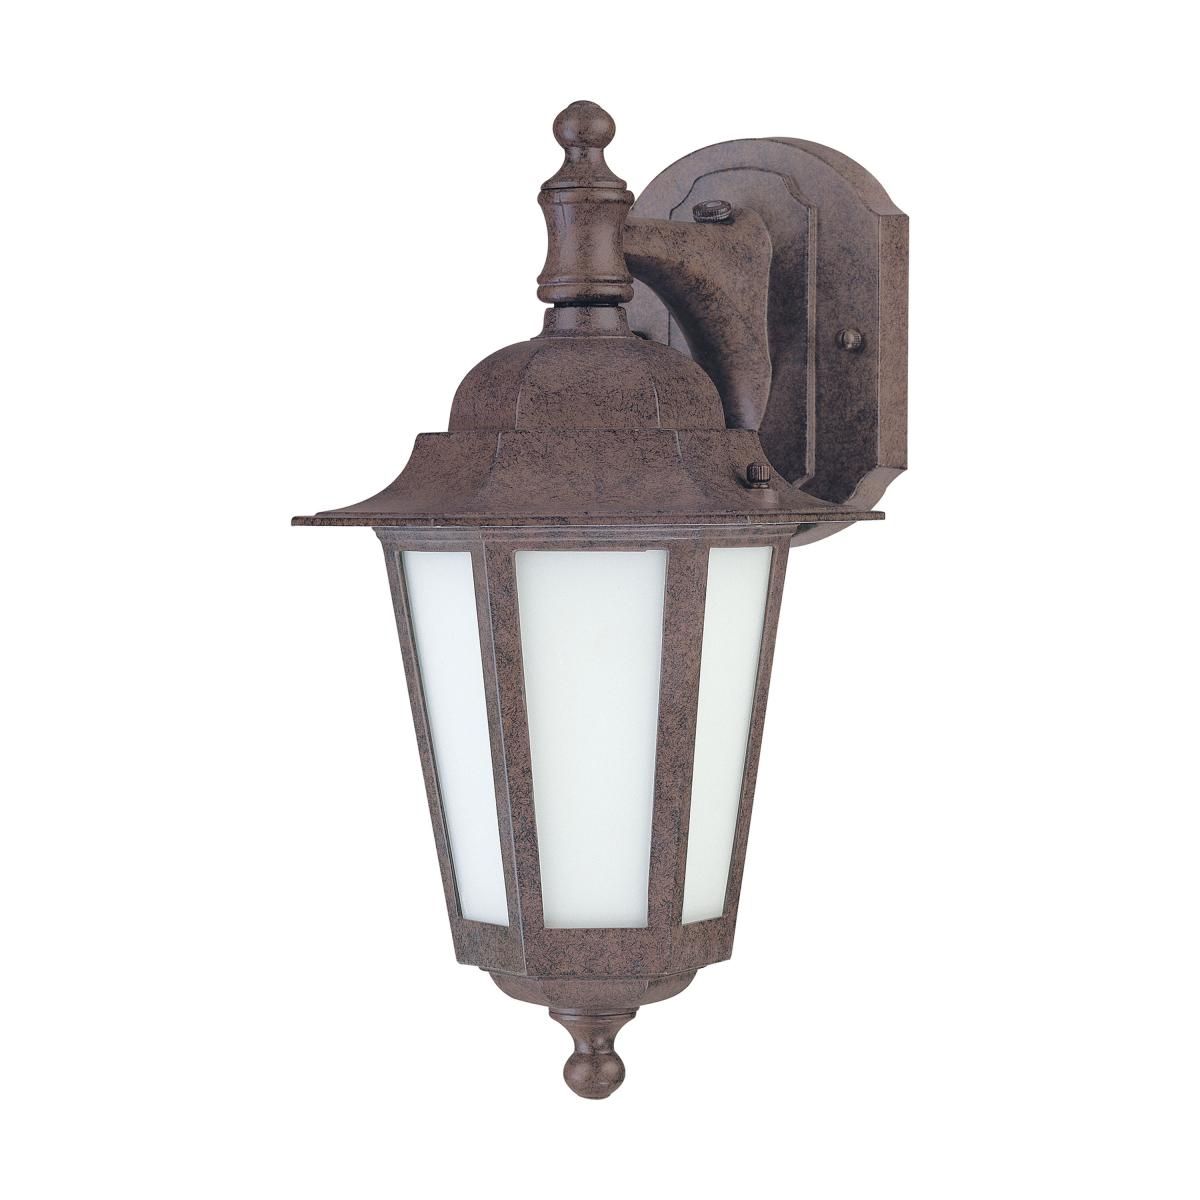 Comerstone 13 In. Outdoor Wall Lantern Bronze finish - Bees Lighting